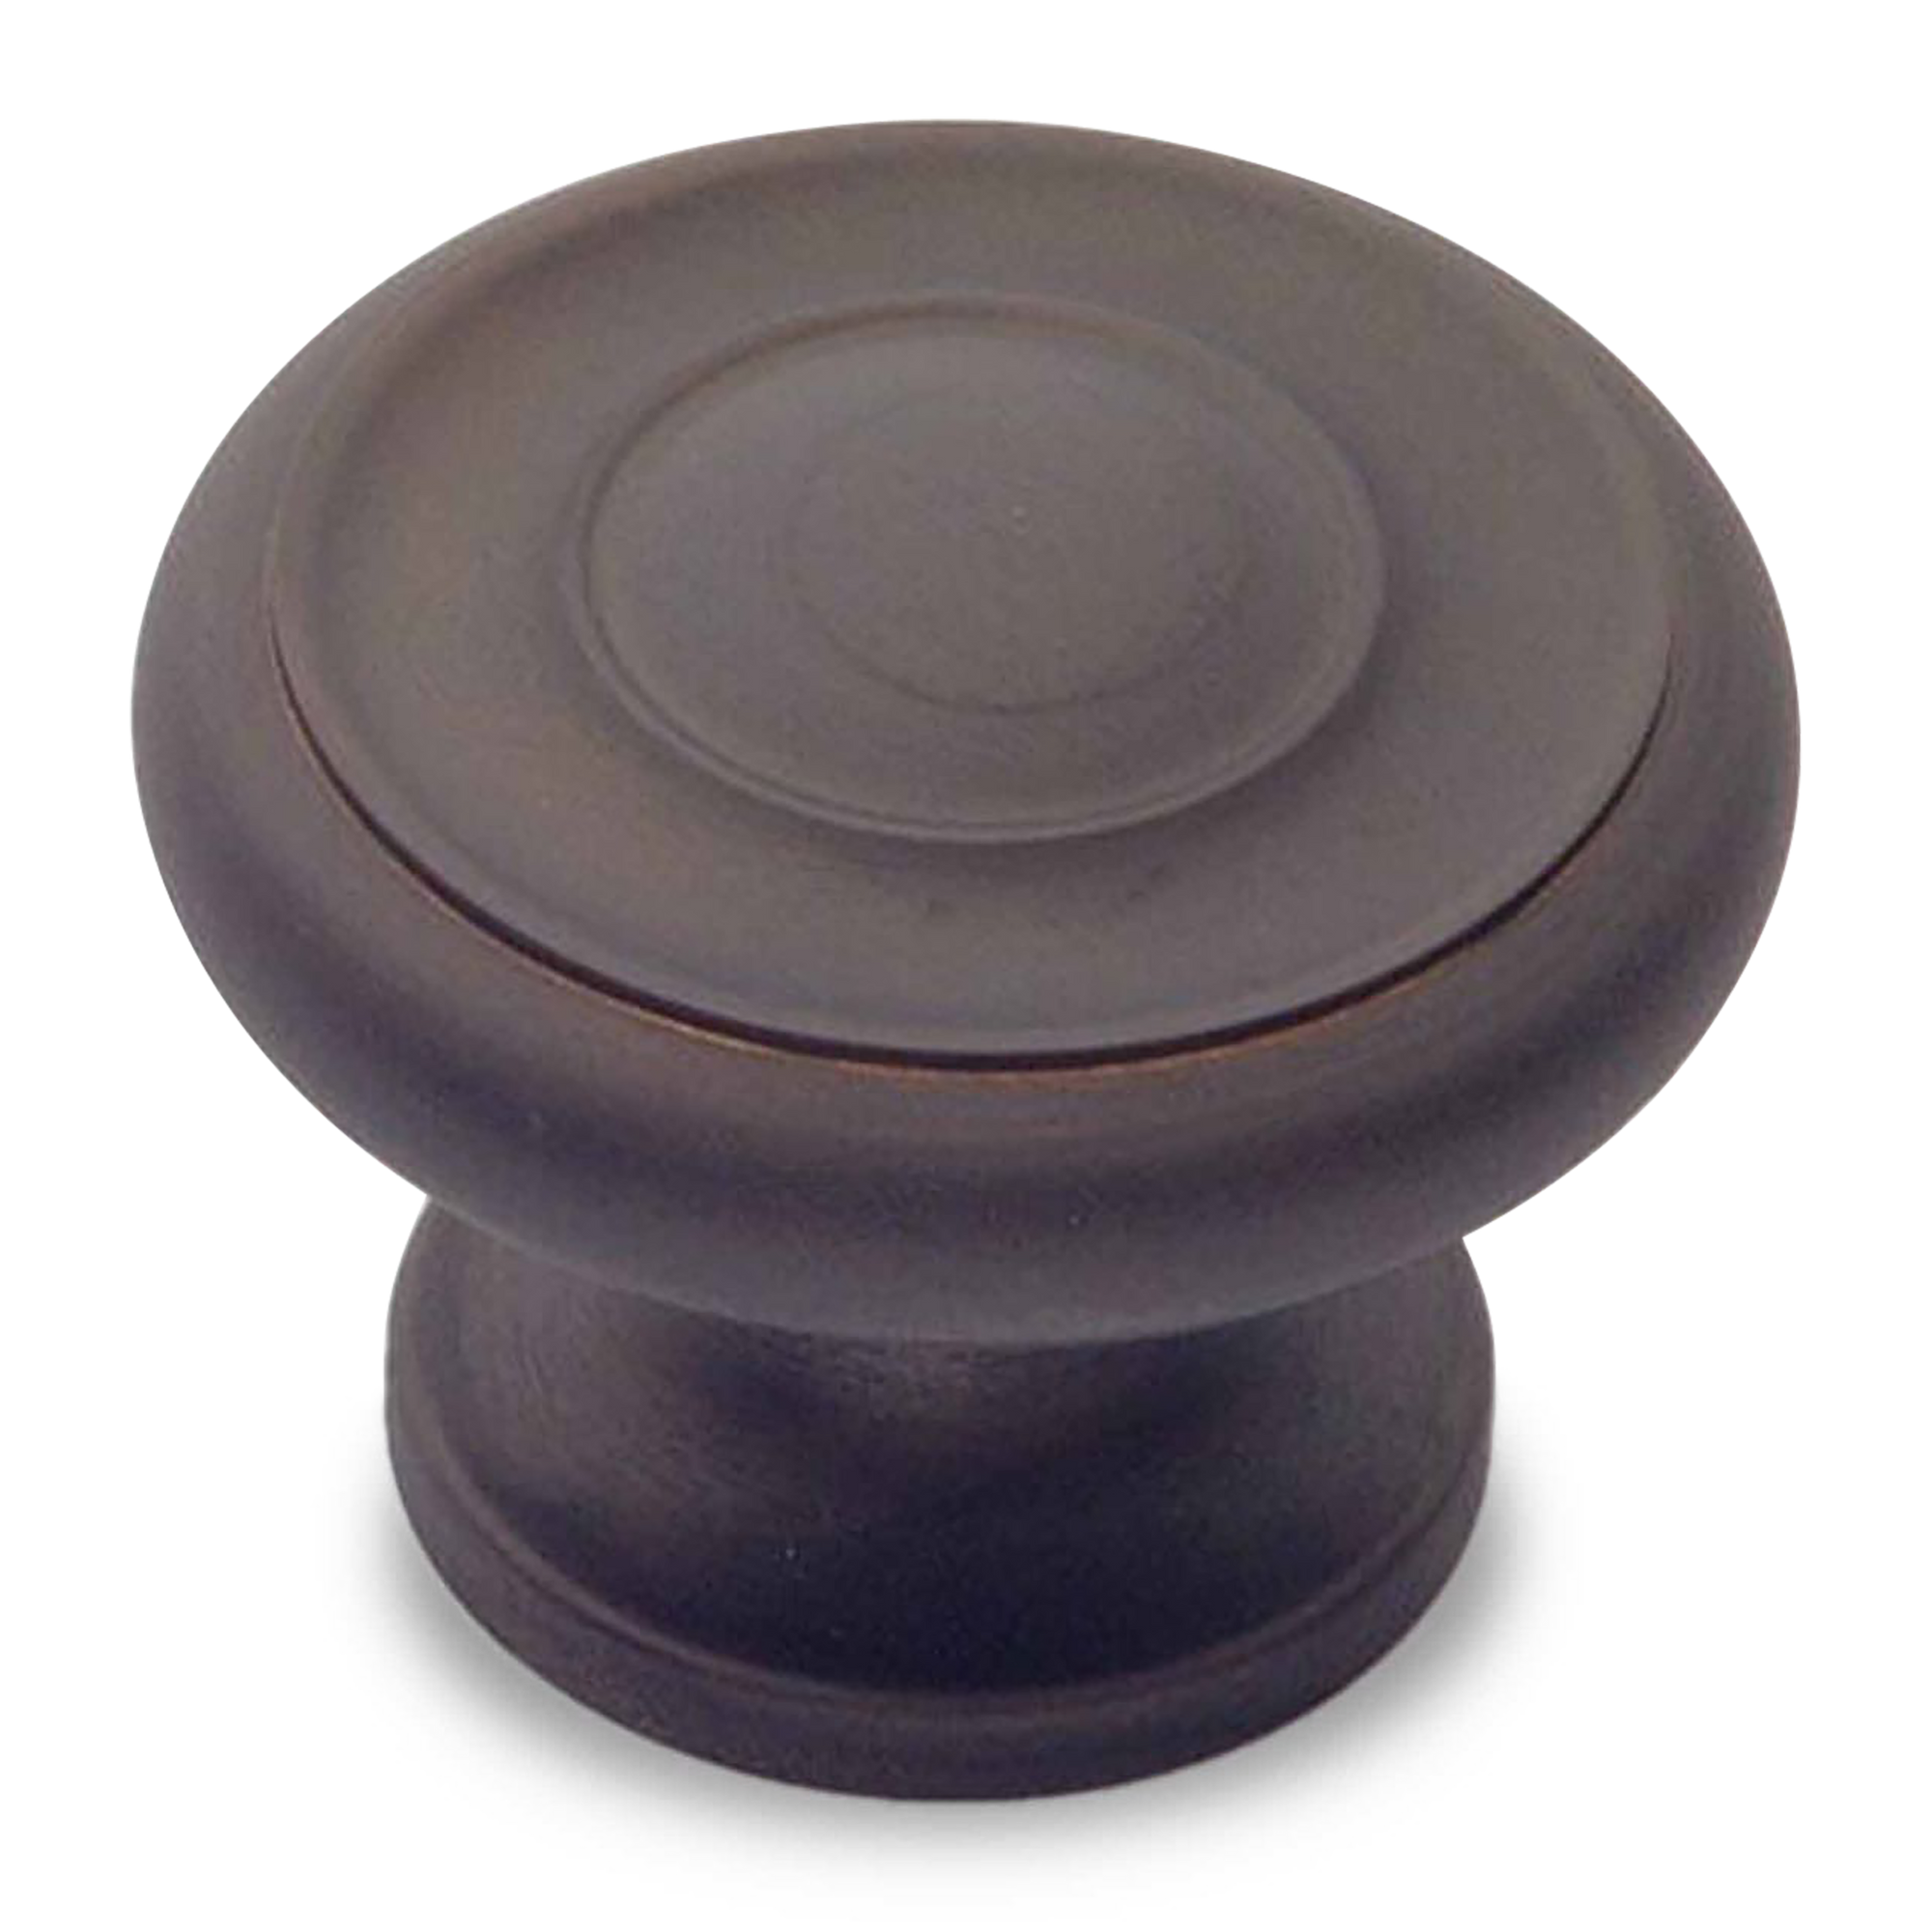 This antique inspired knob features classic brass detailing.